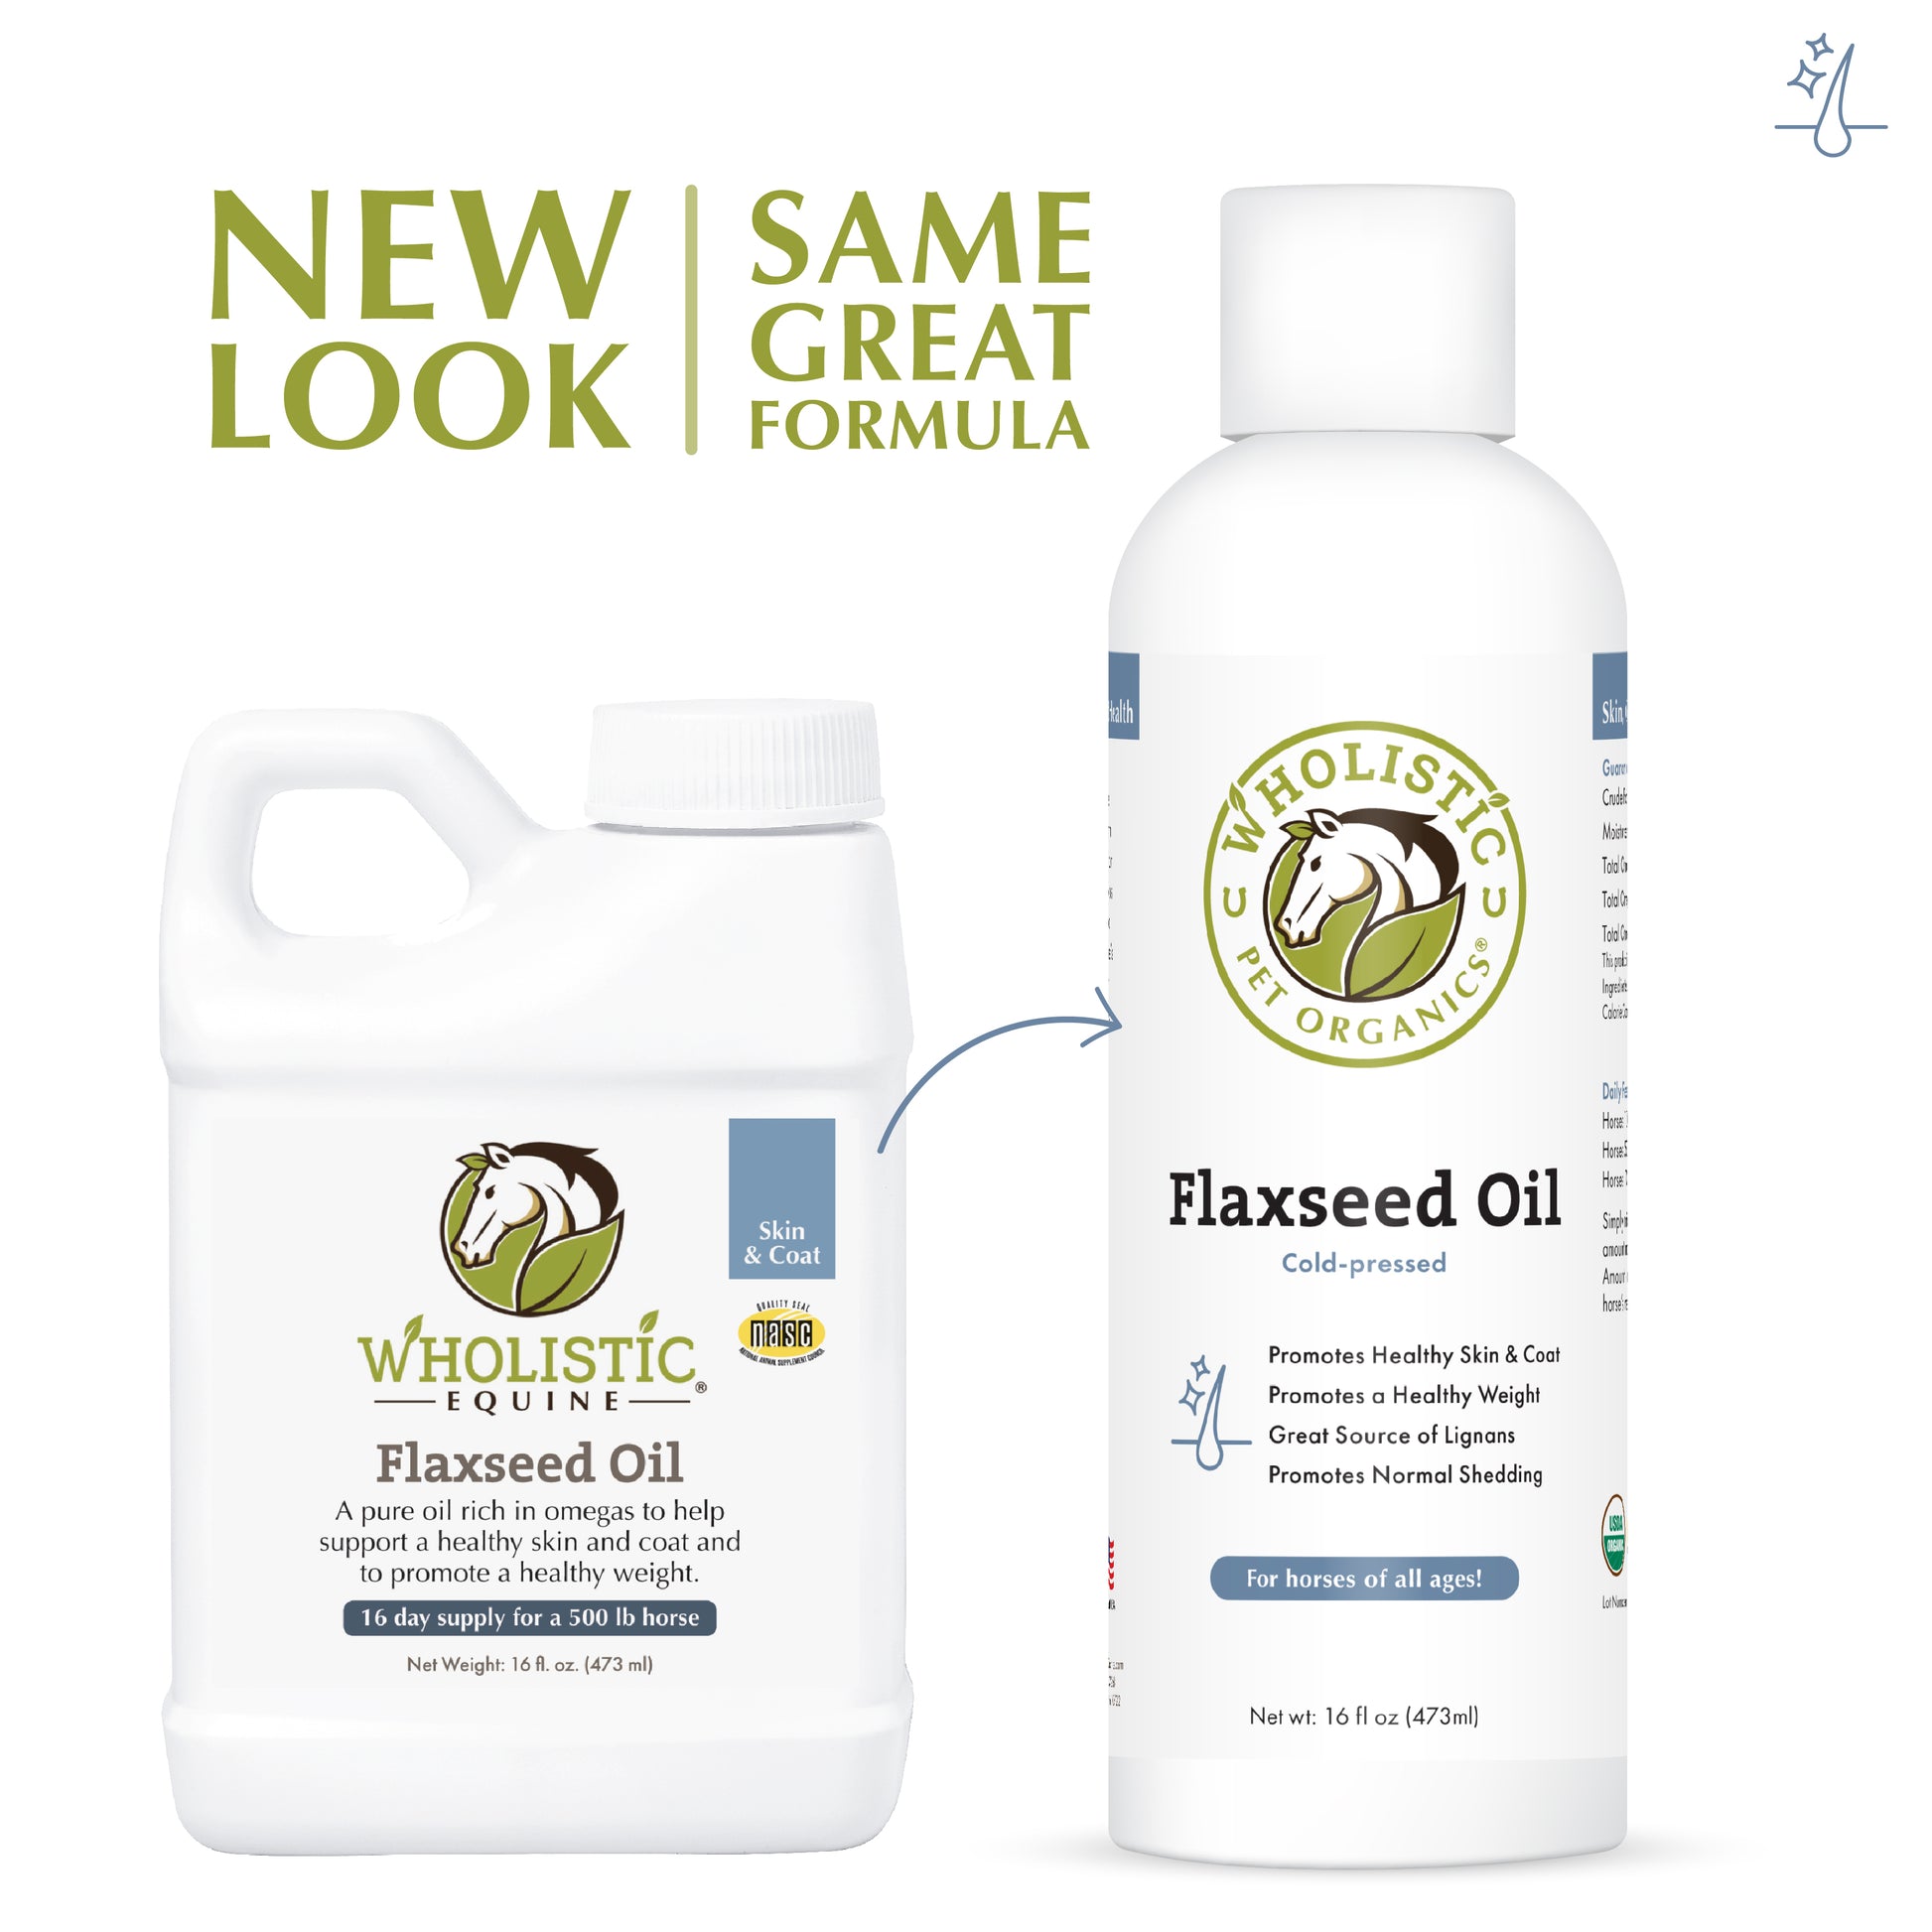 linseed oil wholesale, linseed oil wholesale Suppliers and Manufacturers at